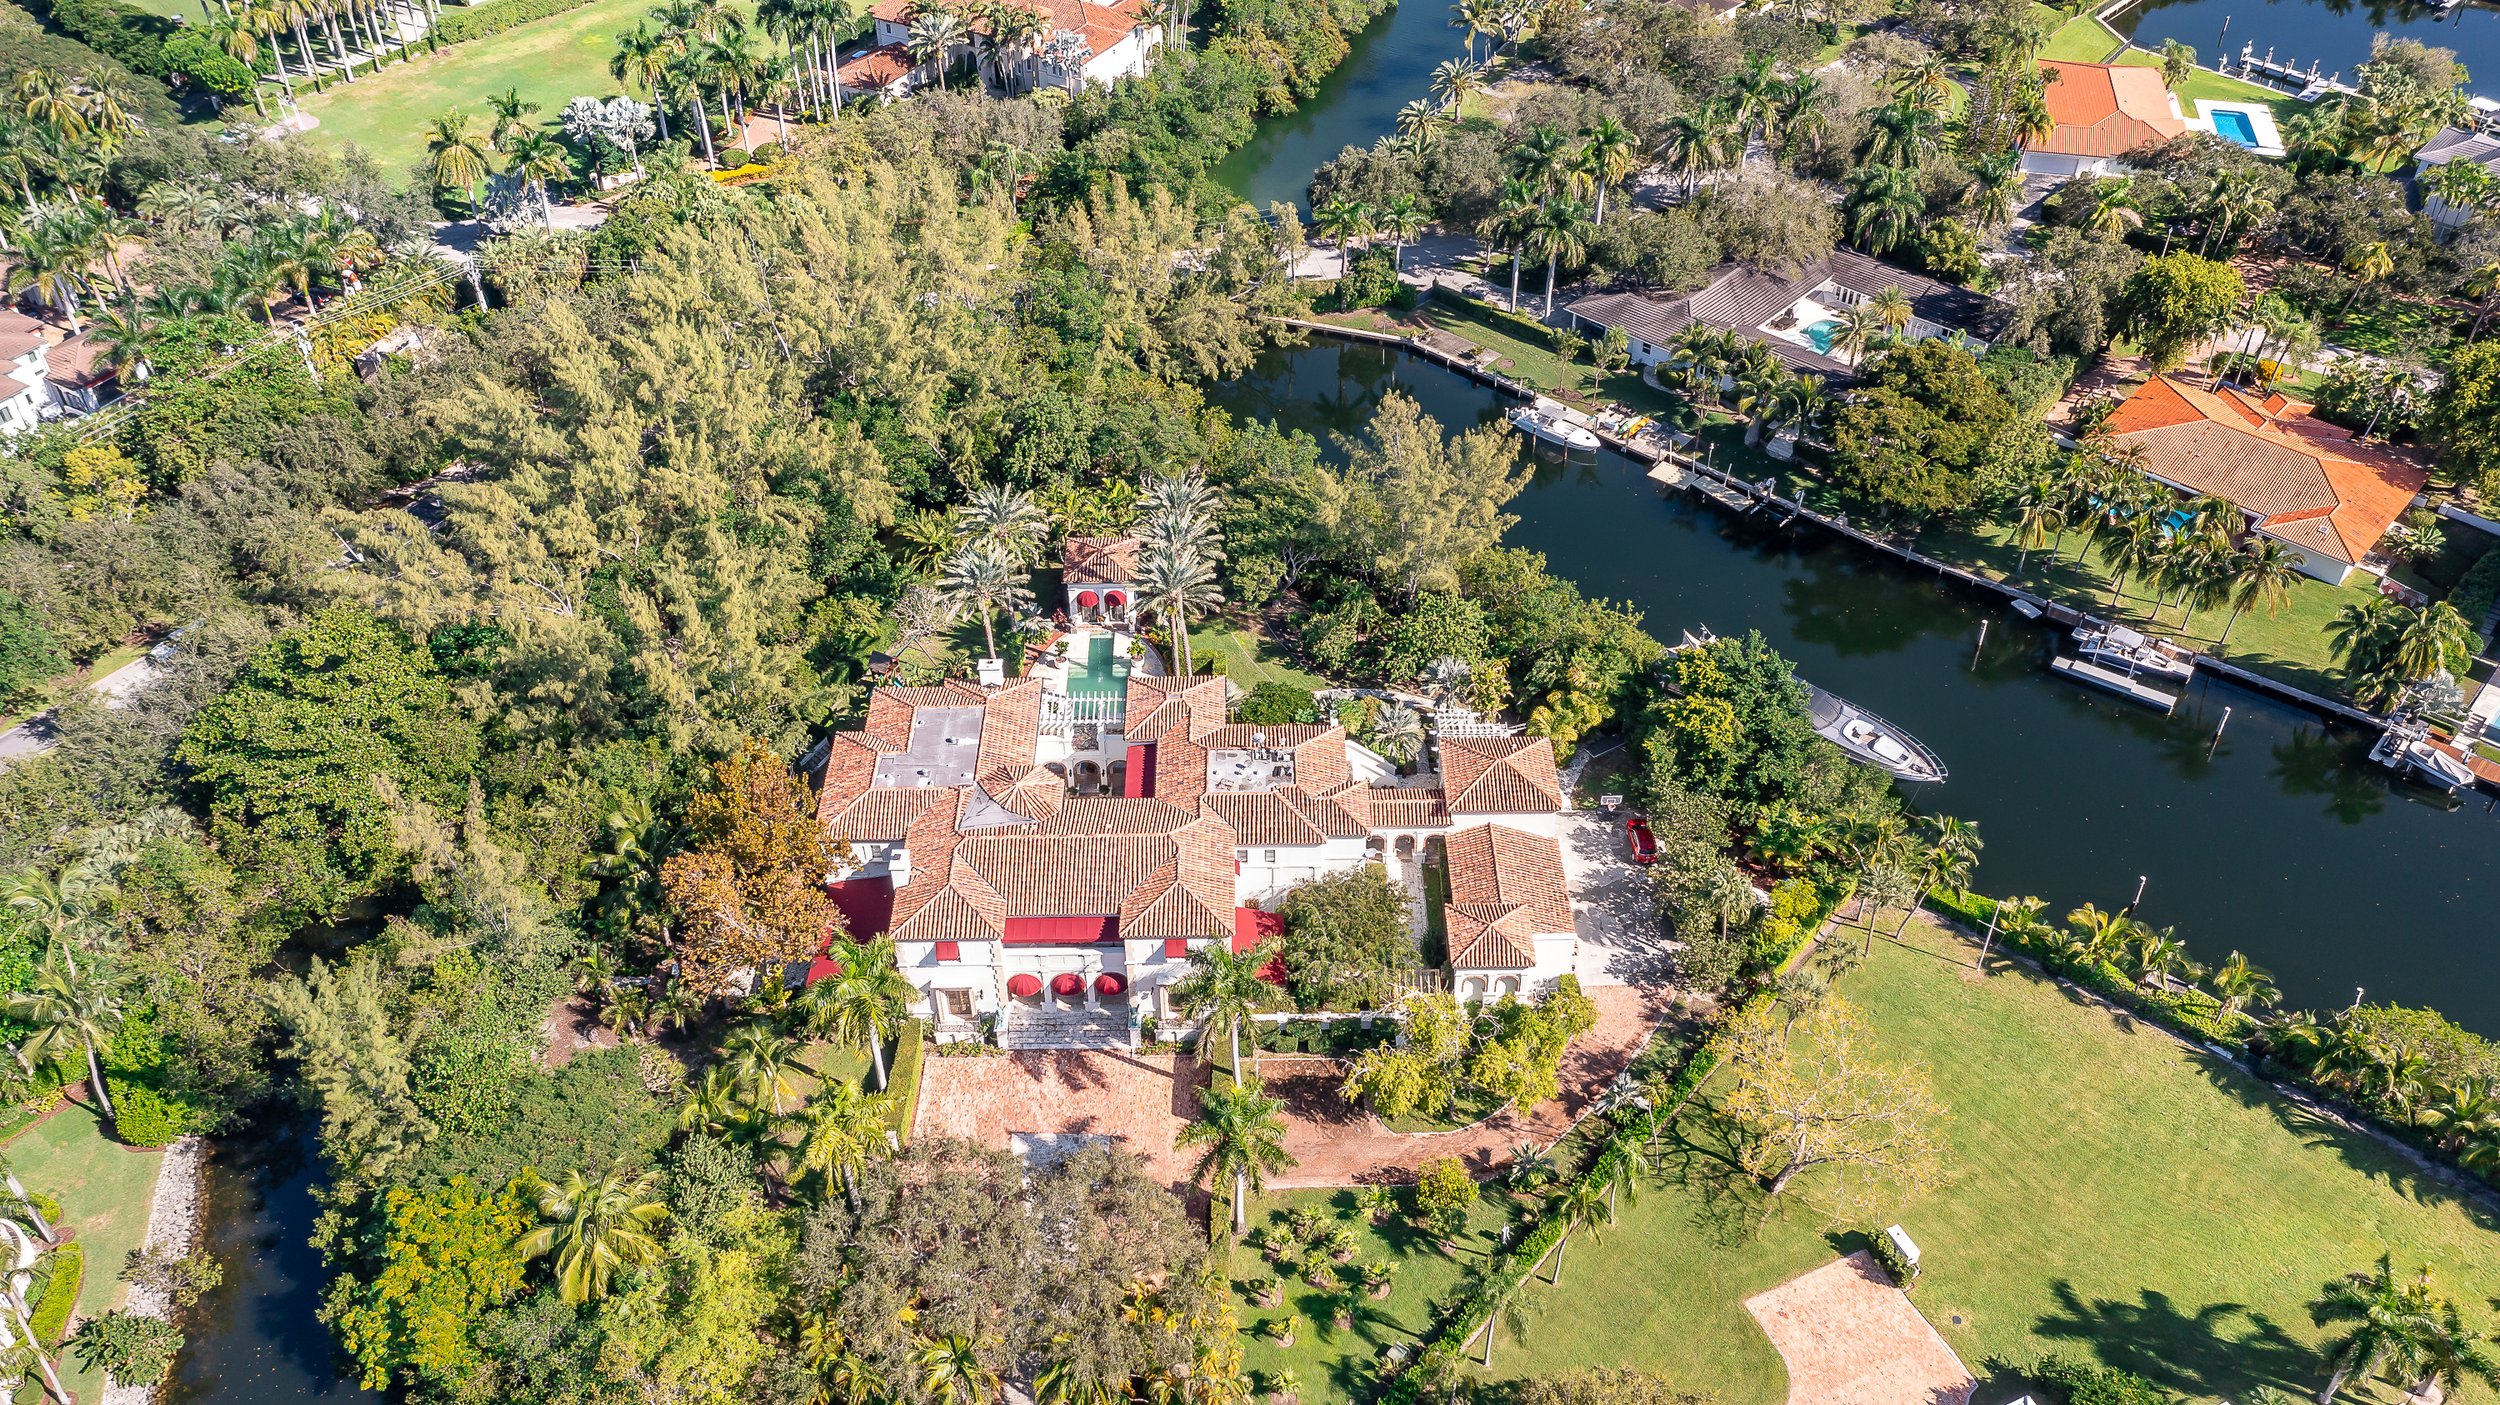 Check-Out This Lavish Coral Gables Estate Located In The Ultra-Private Journey's End Community Which Just Listed For $69.9 Million  20.jpg